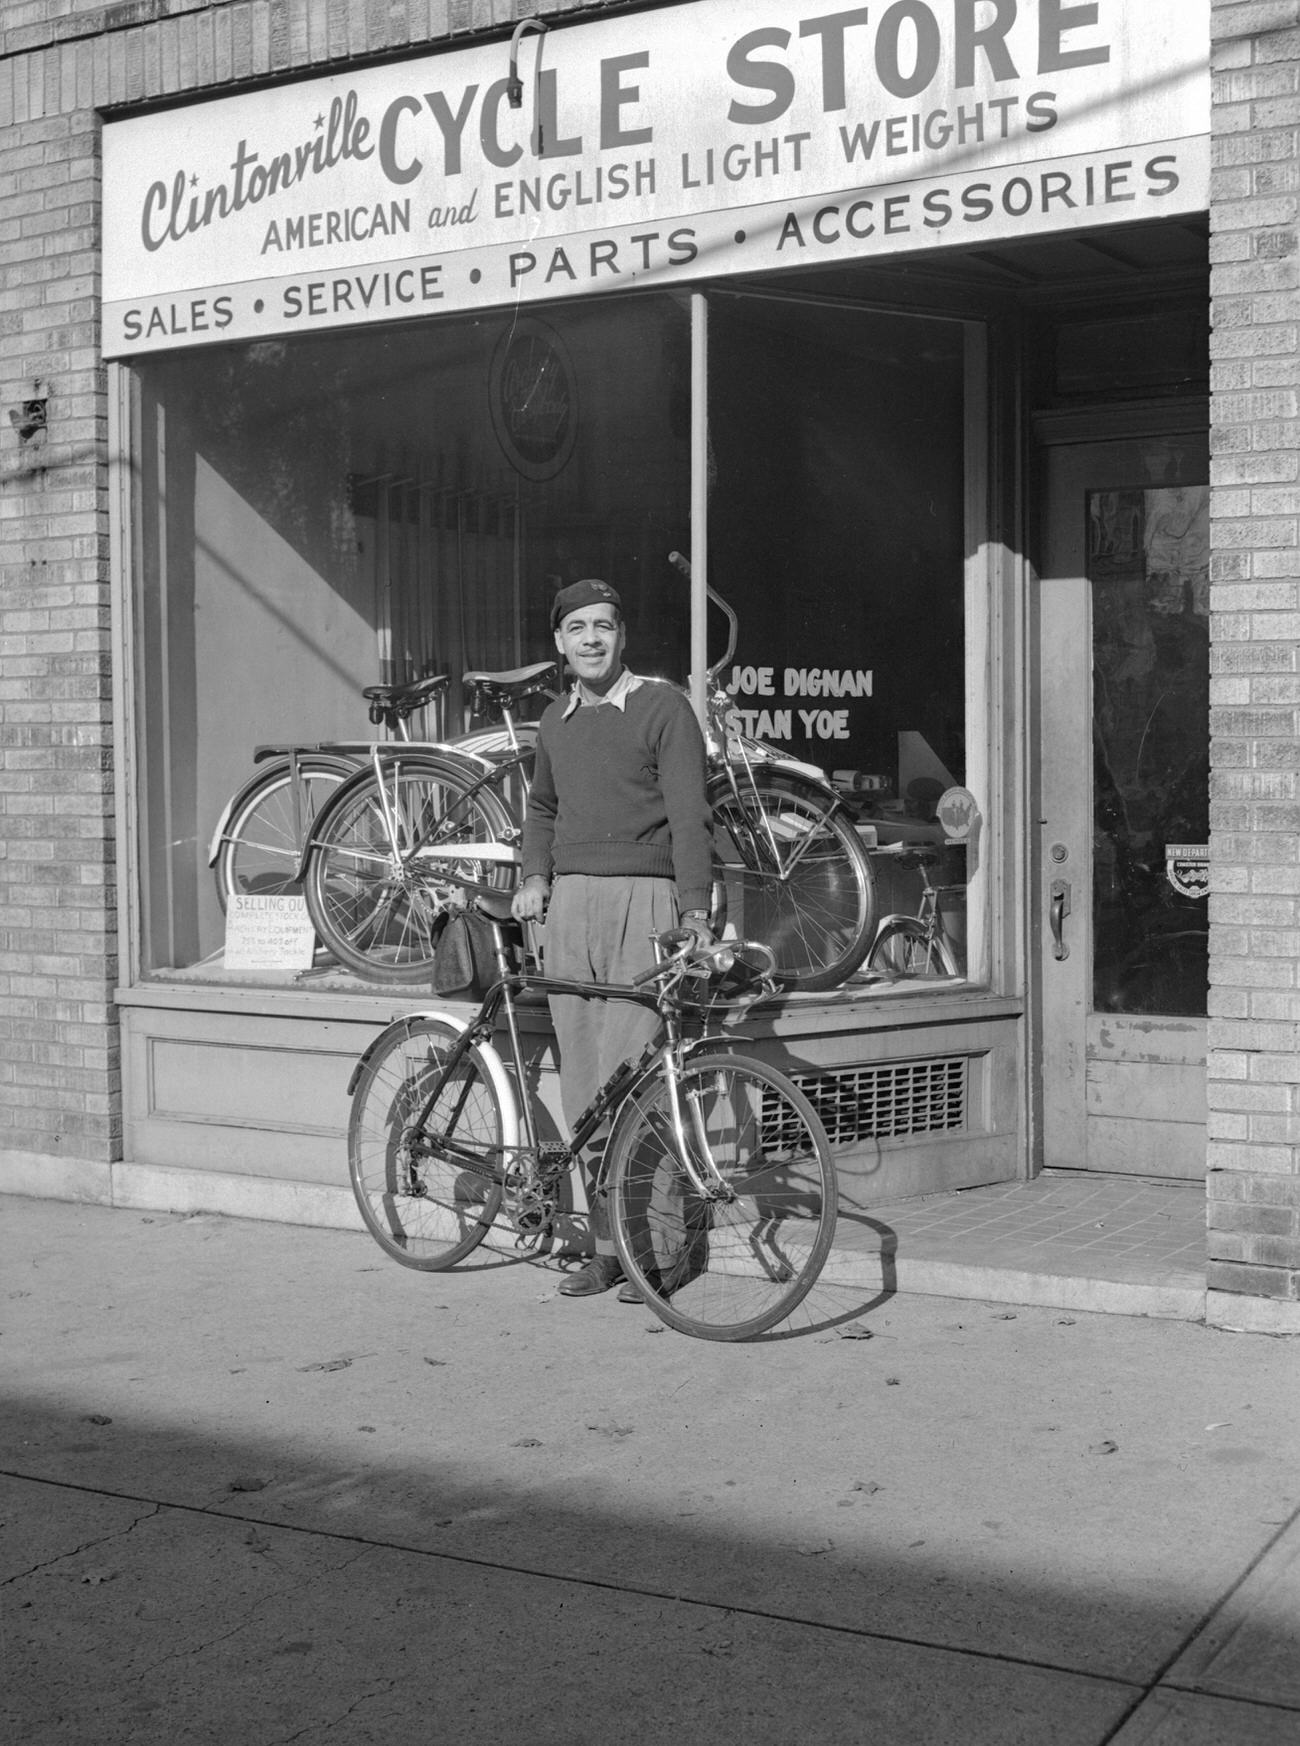 Clintonville Cycle Store, specialized in American and English light weight bicycles, owned by Joe Dignan and Stan Yoe, 1947.